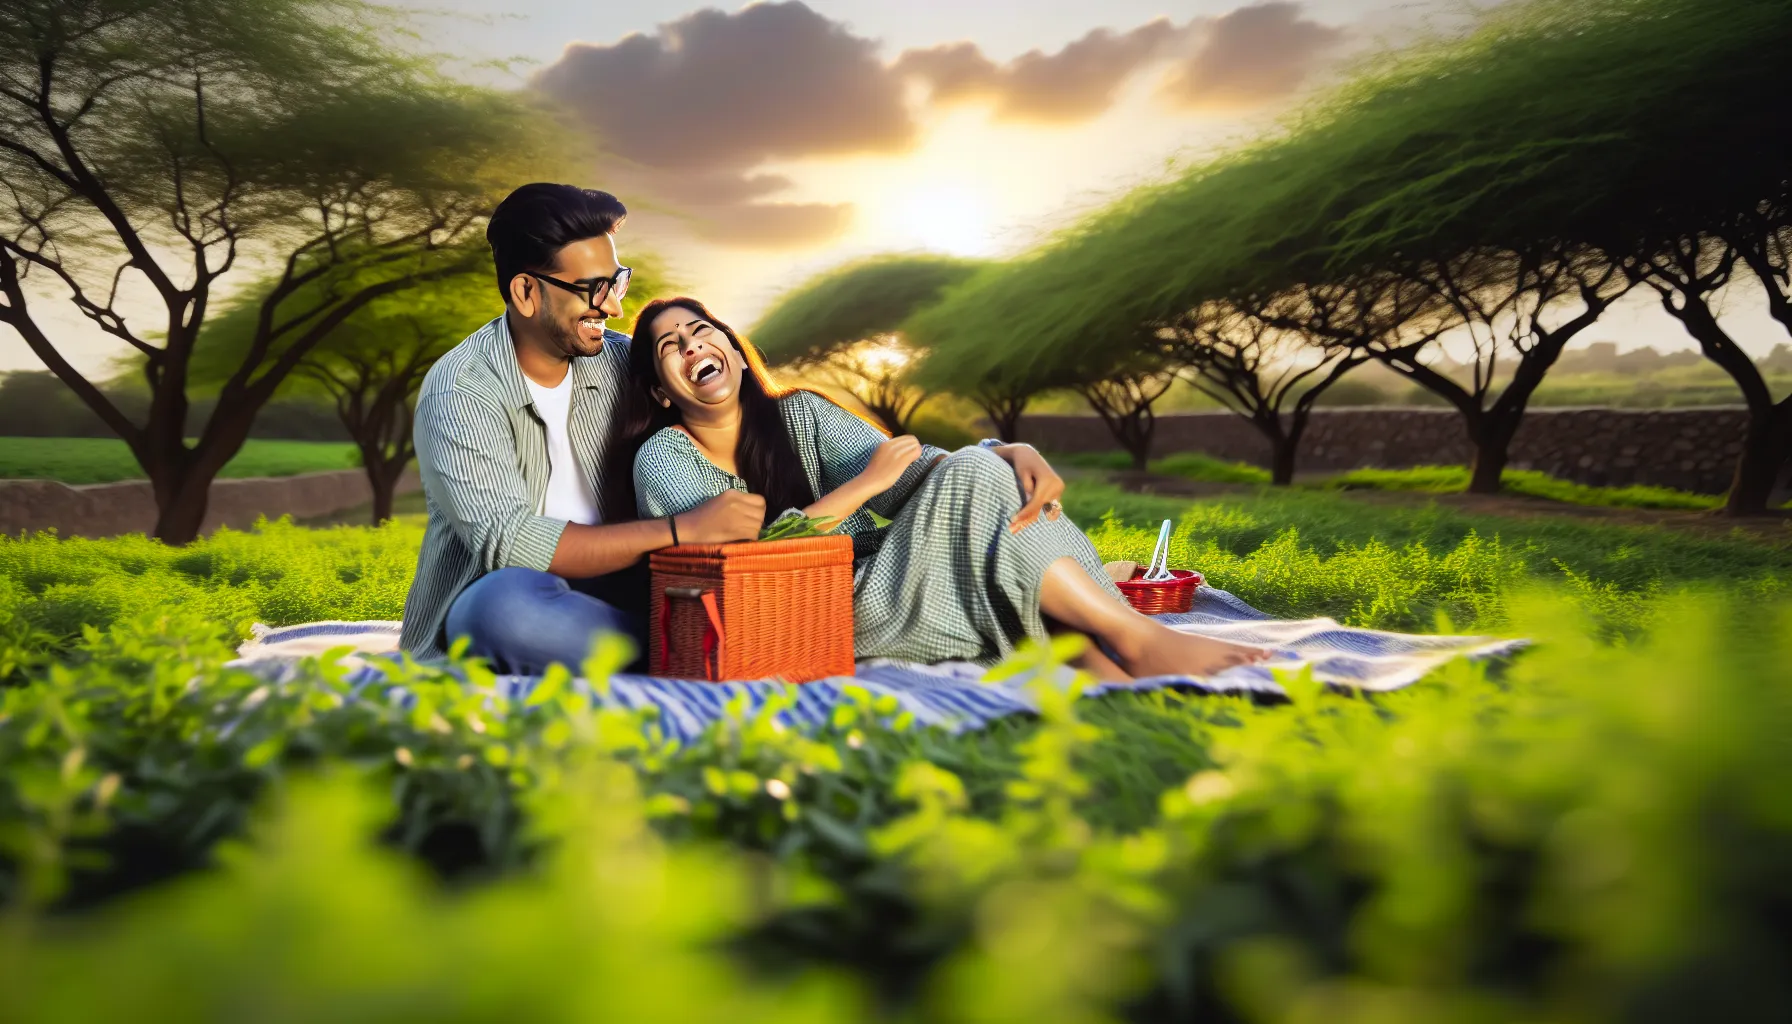 Couple enjoying a picnic in a tranquil outdoor setting